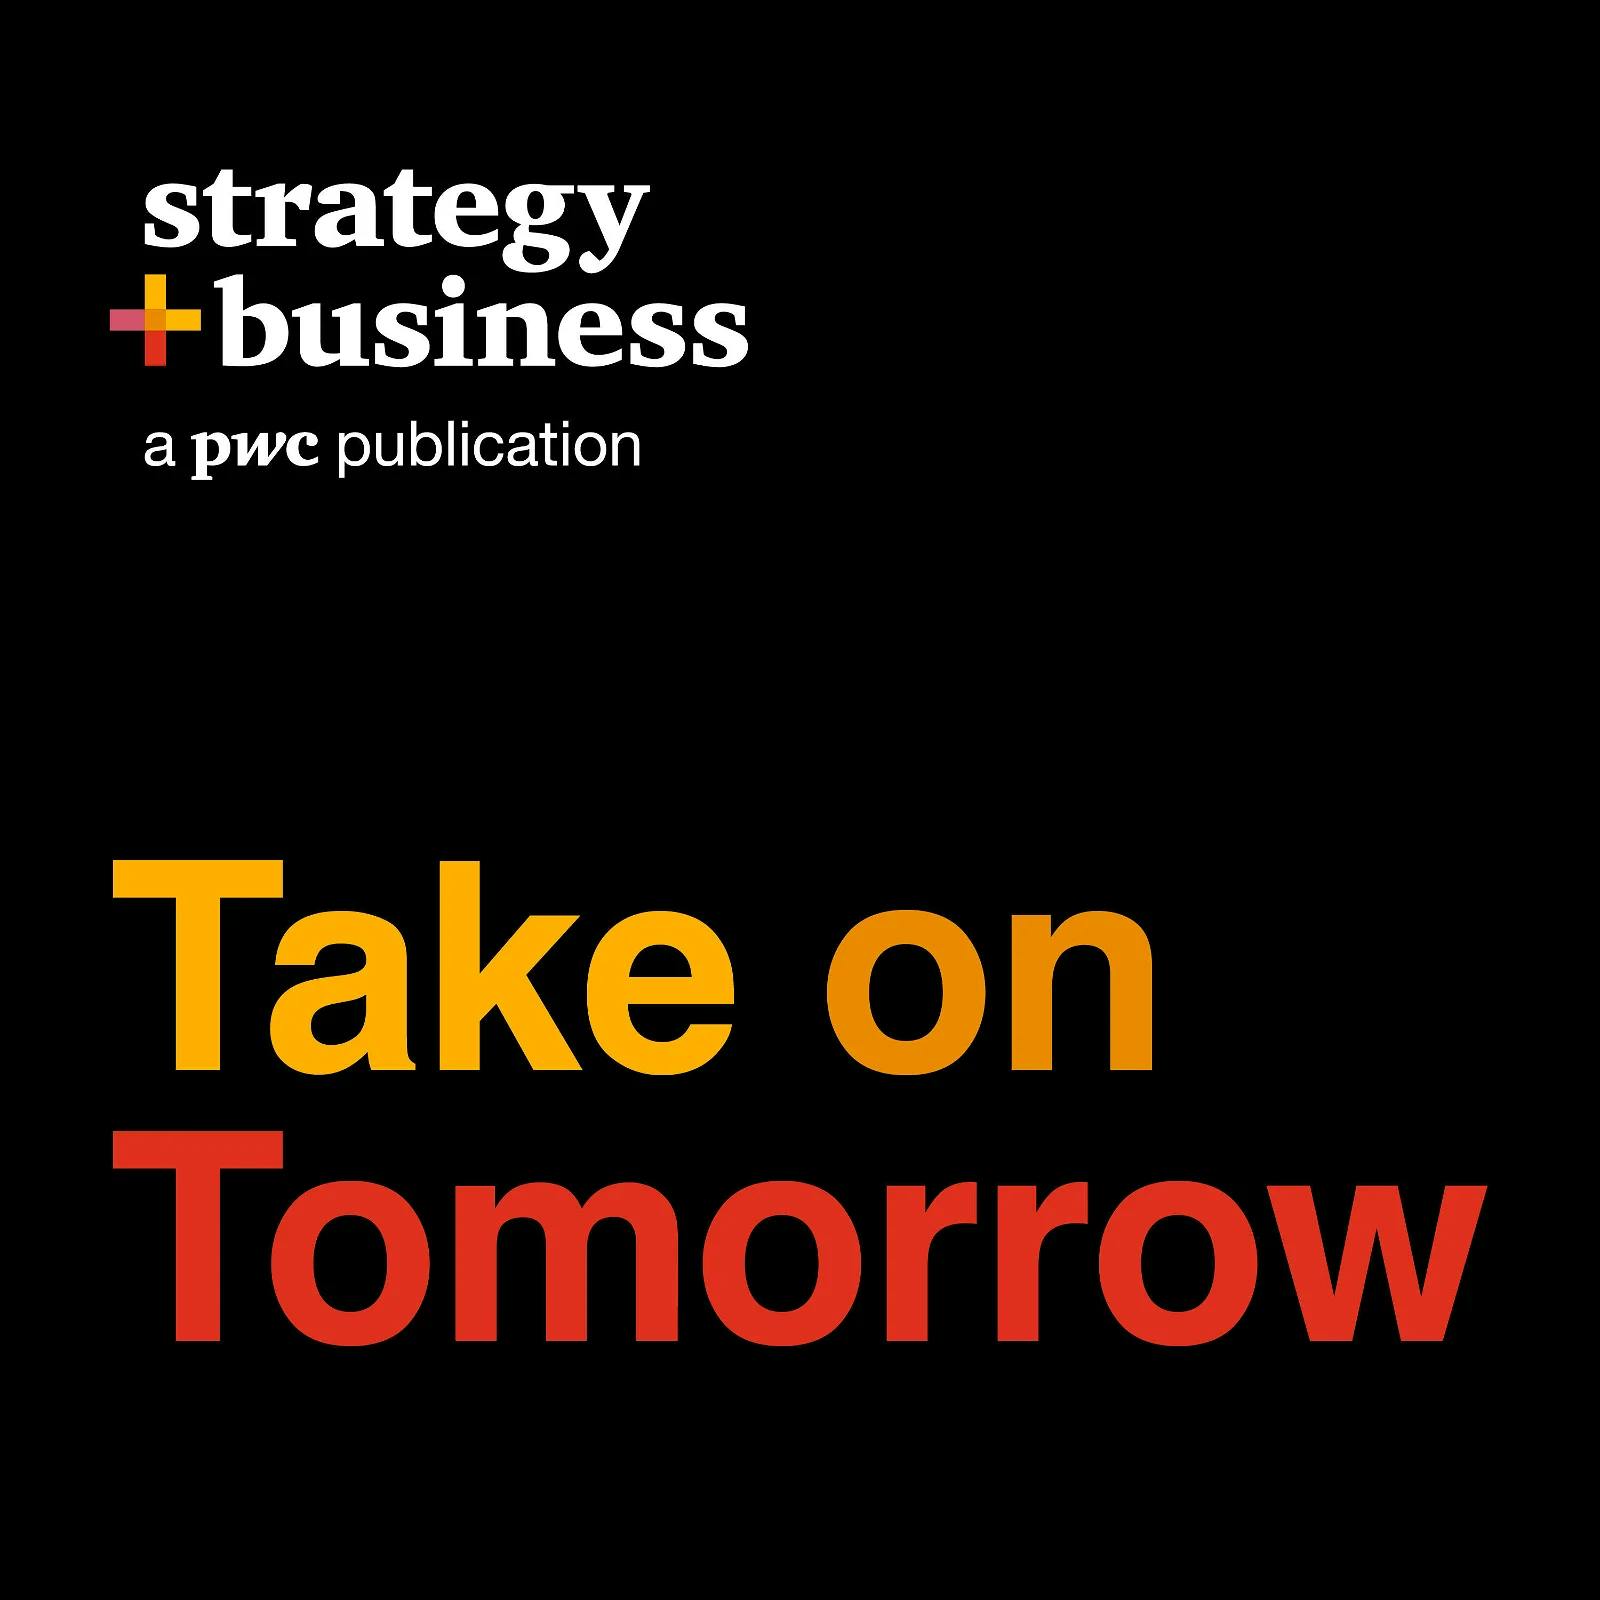 Review: Take on Tomorrow from PwC